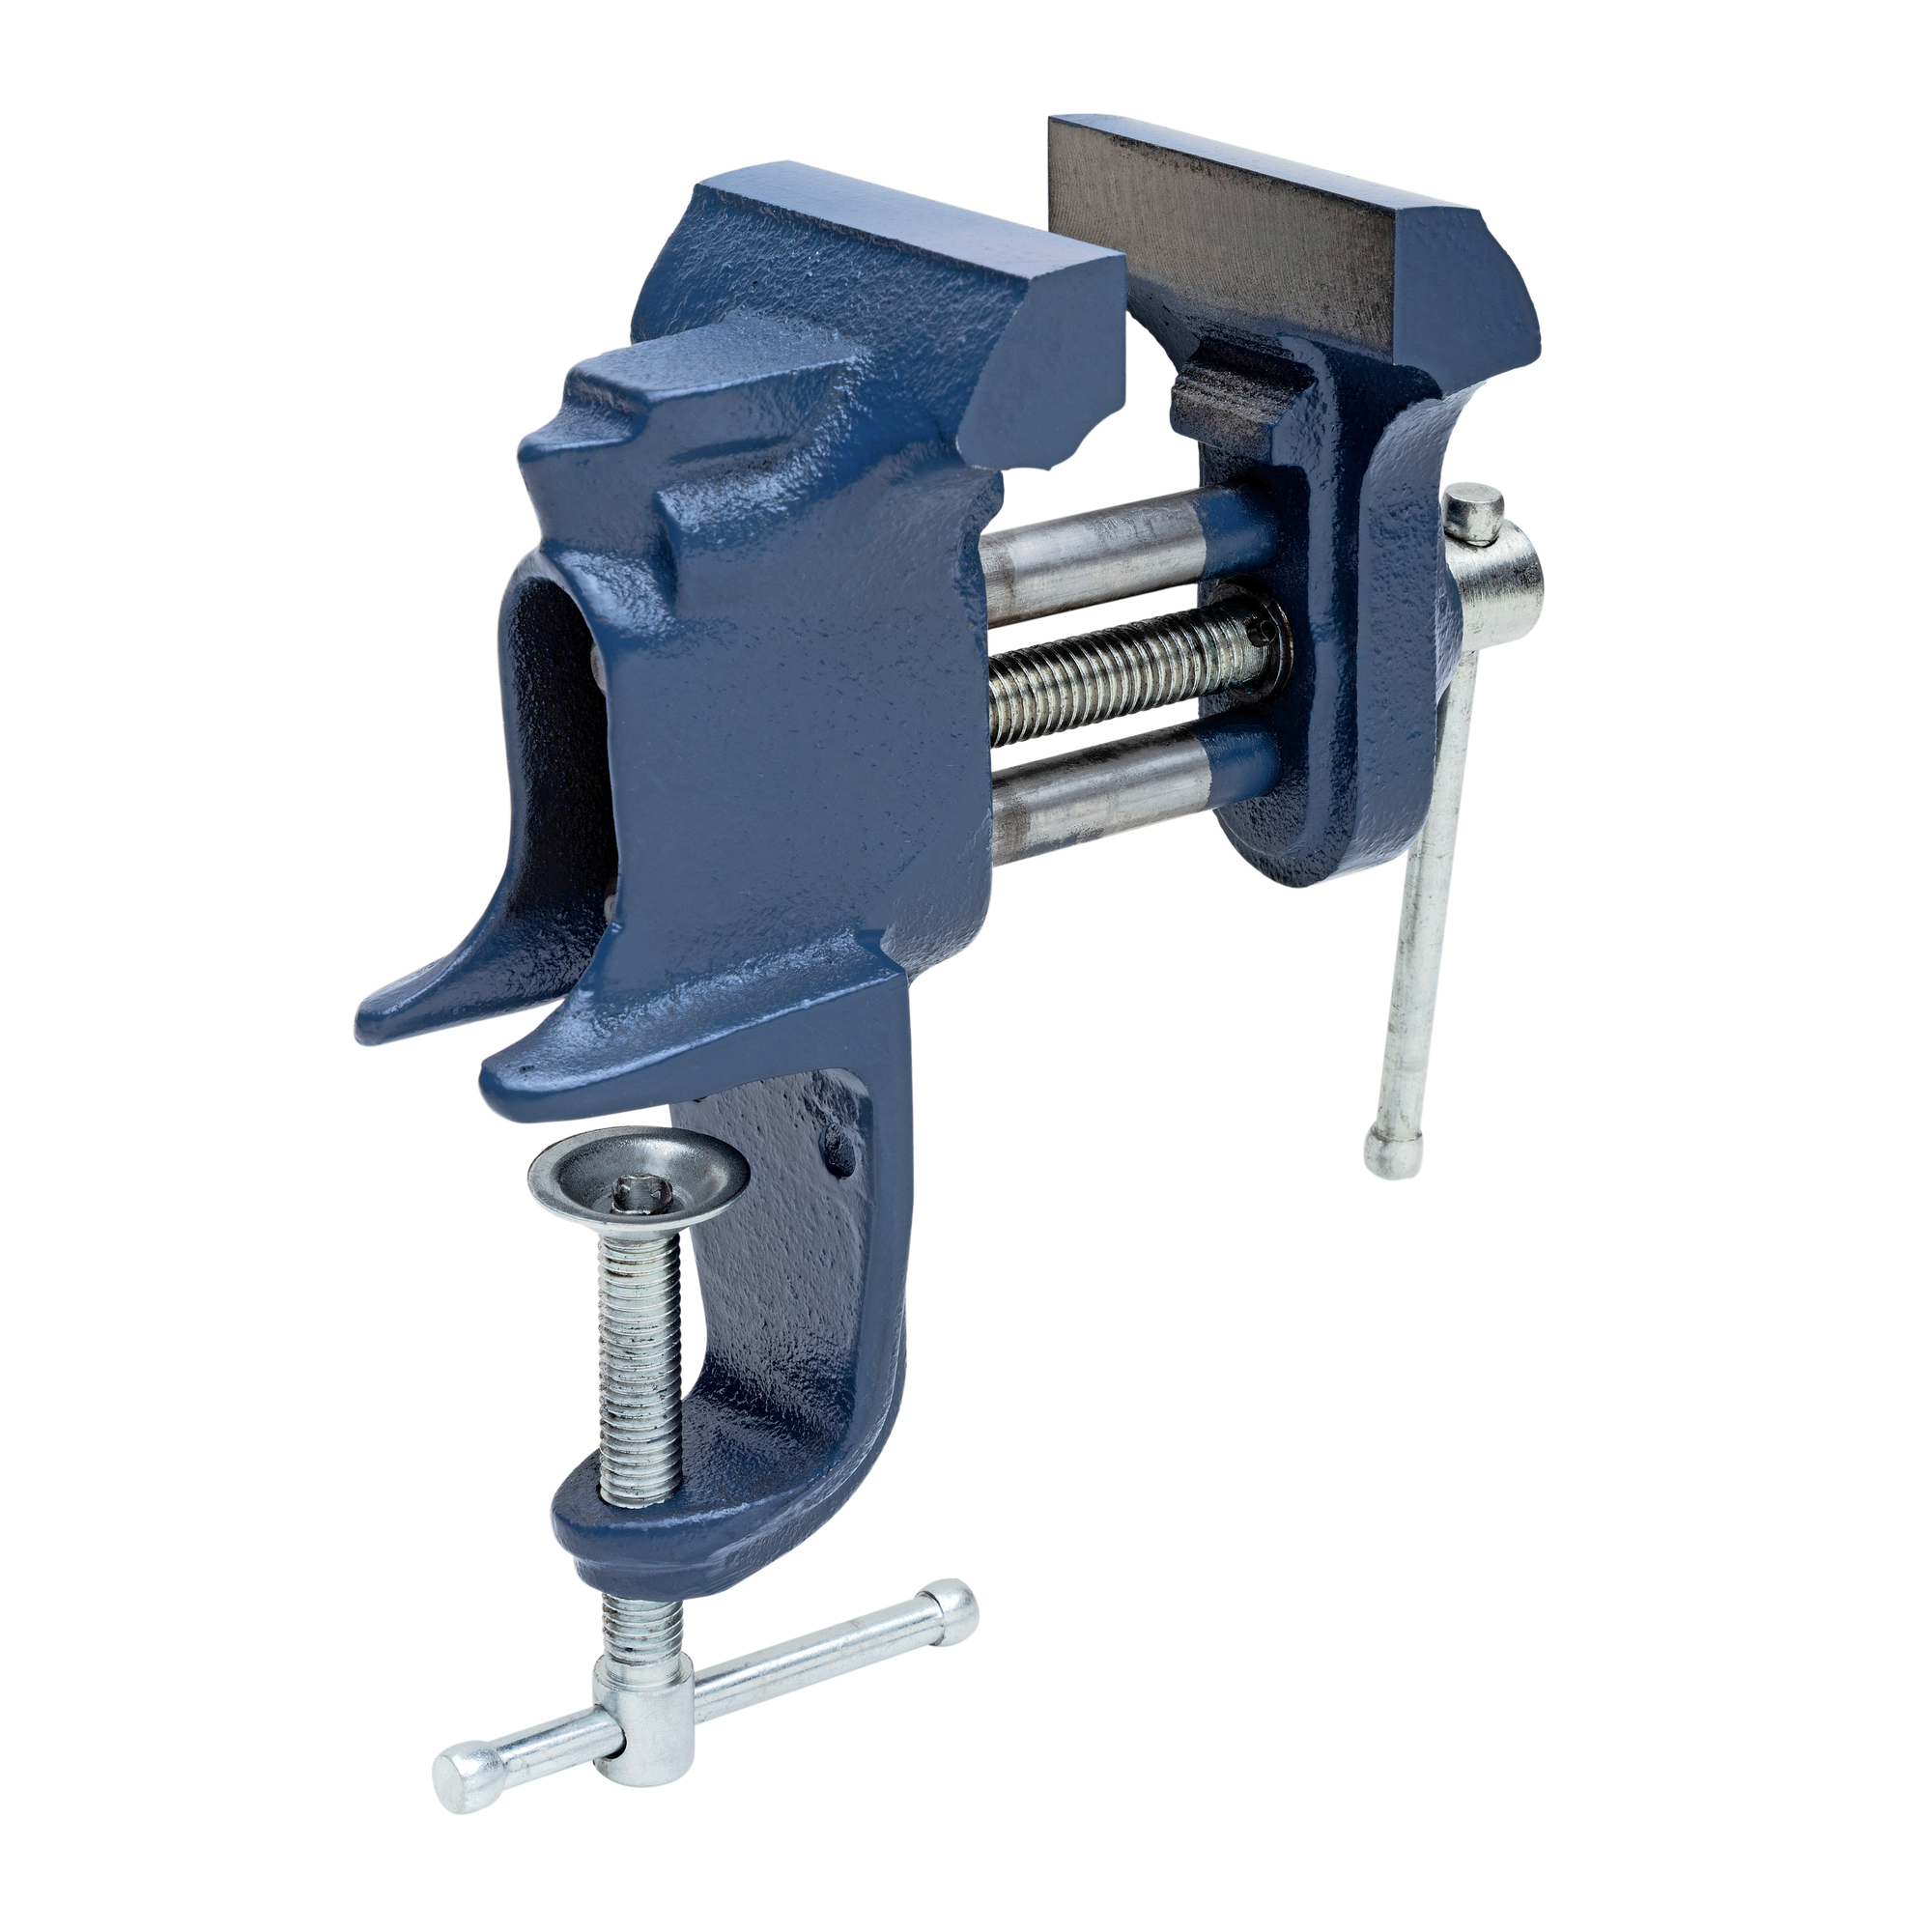 Yost Vises, 2.5Inch Clamp On Vise, Jaw Width 2.5 in, Jaw Capacity 2.25 in, Material Iron, Model 250 -  56431